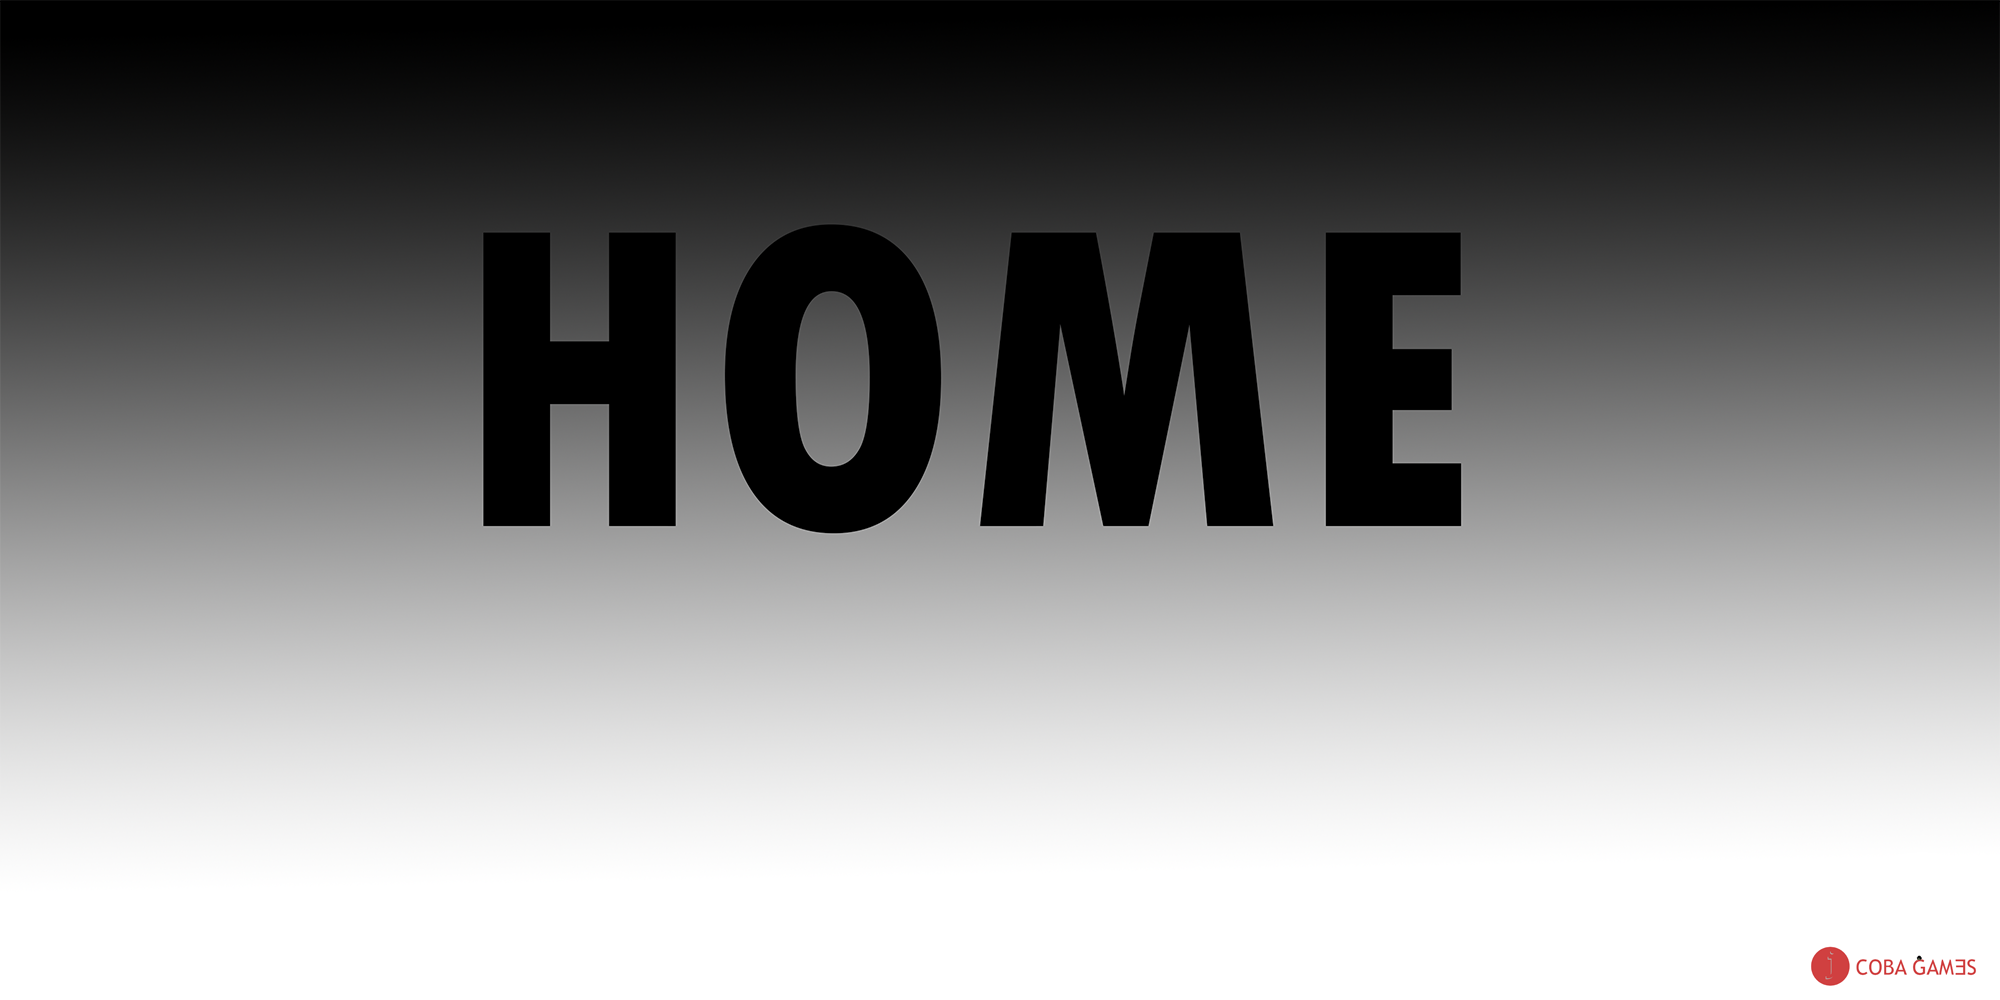 Home -   ¿this is my home?